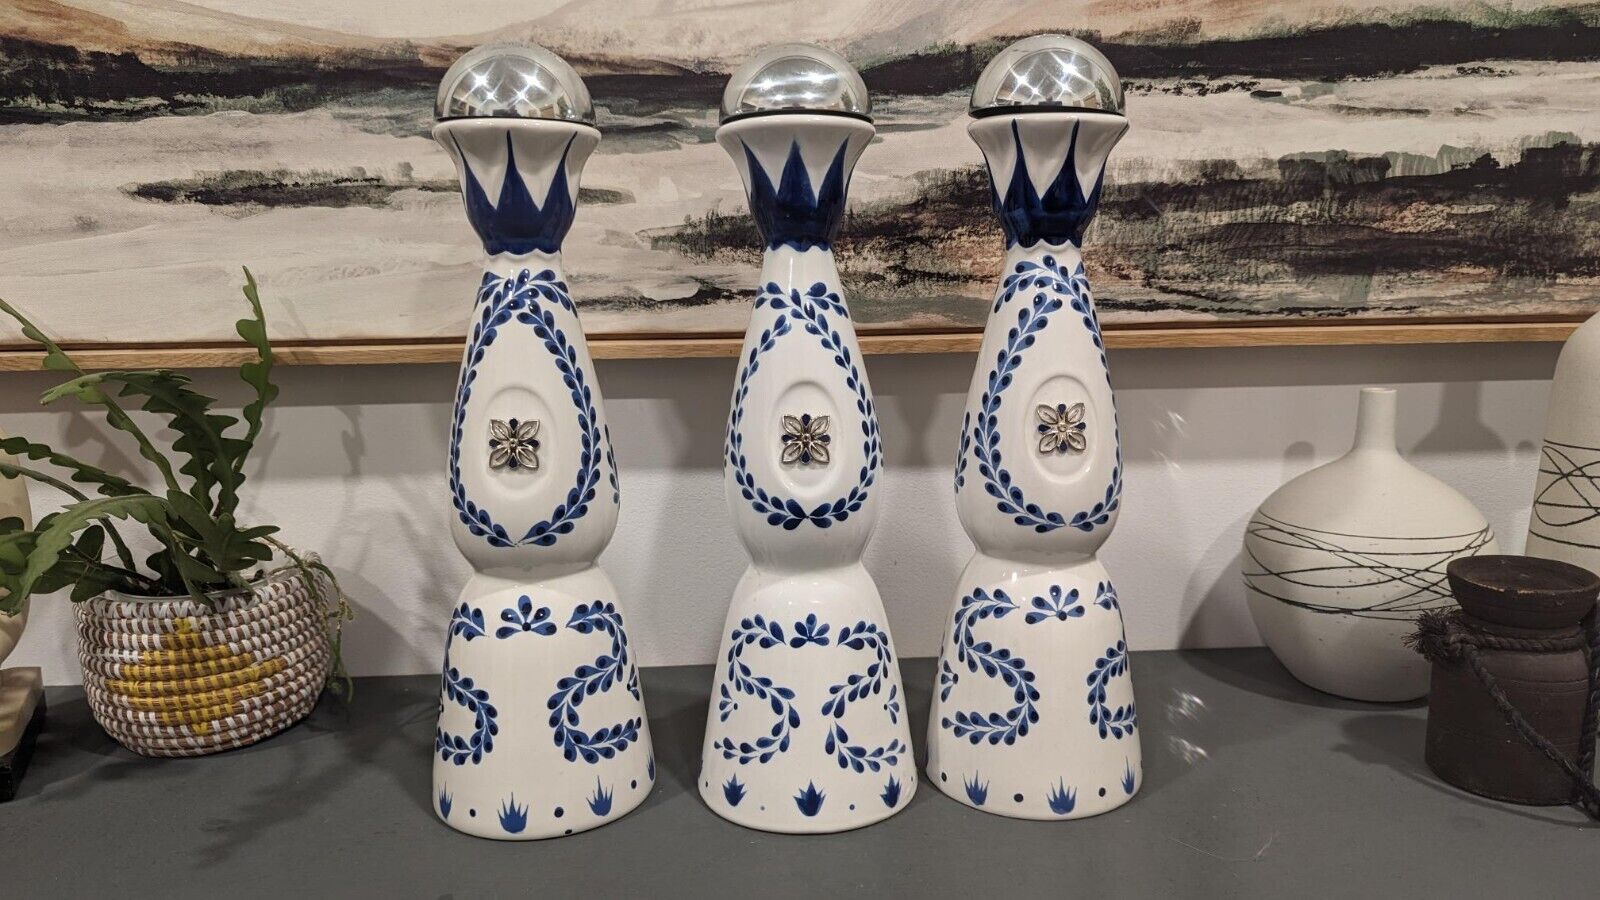 EMPTY Clase Azul Reposado Decanters 750 ml Hand Painted Mexican Pottery